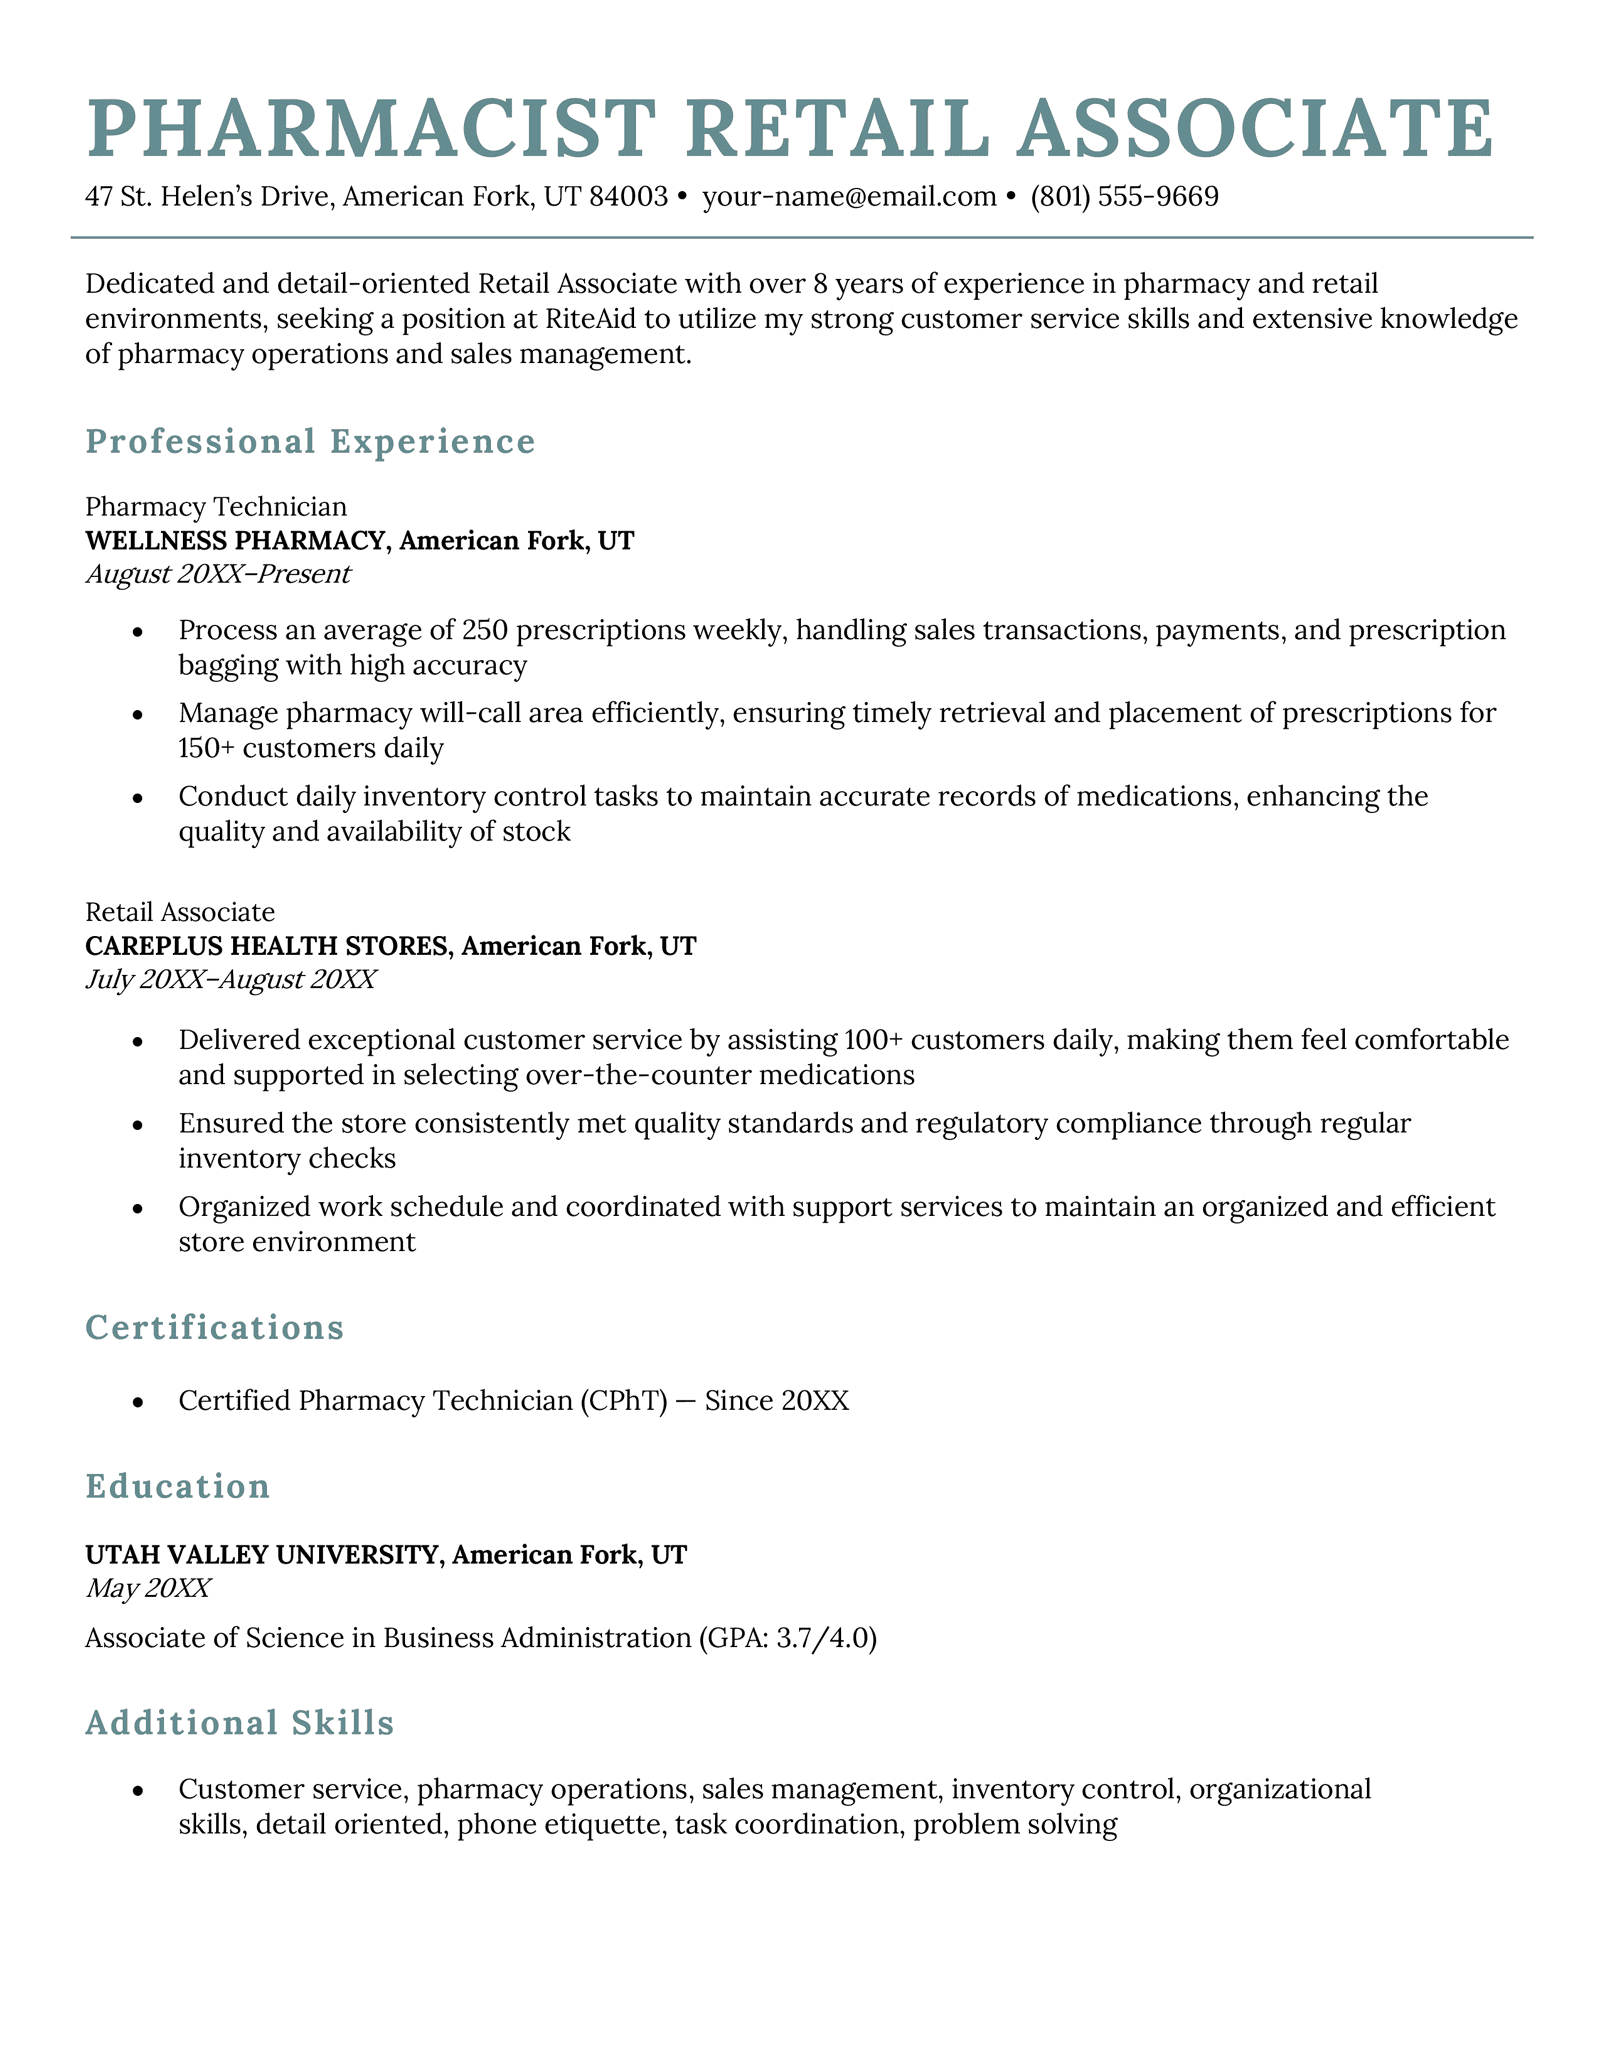 A pharmacist resume example with a teal color scheme and a certifications section.